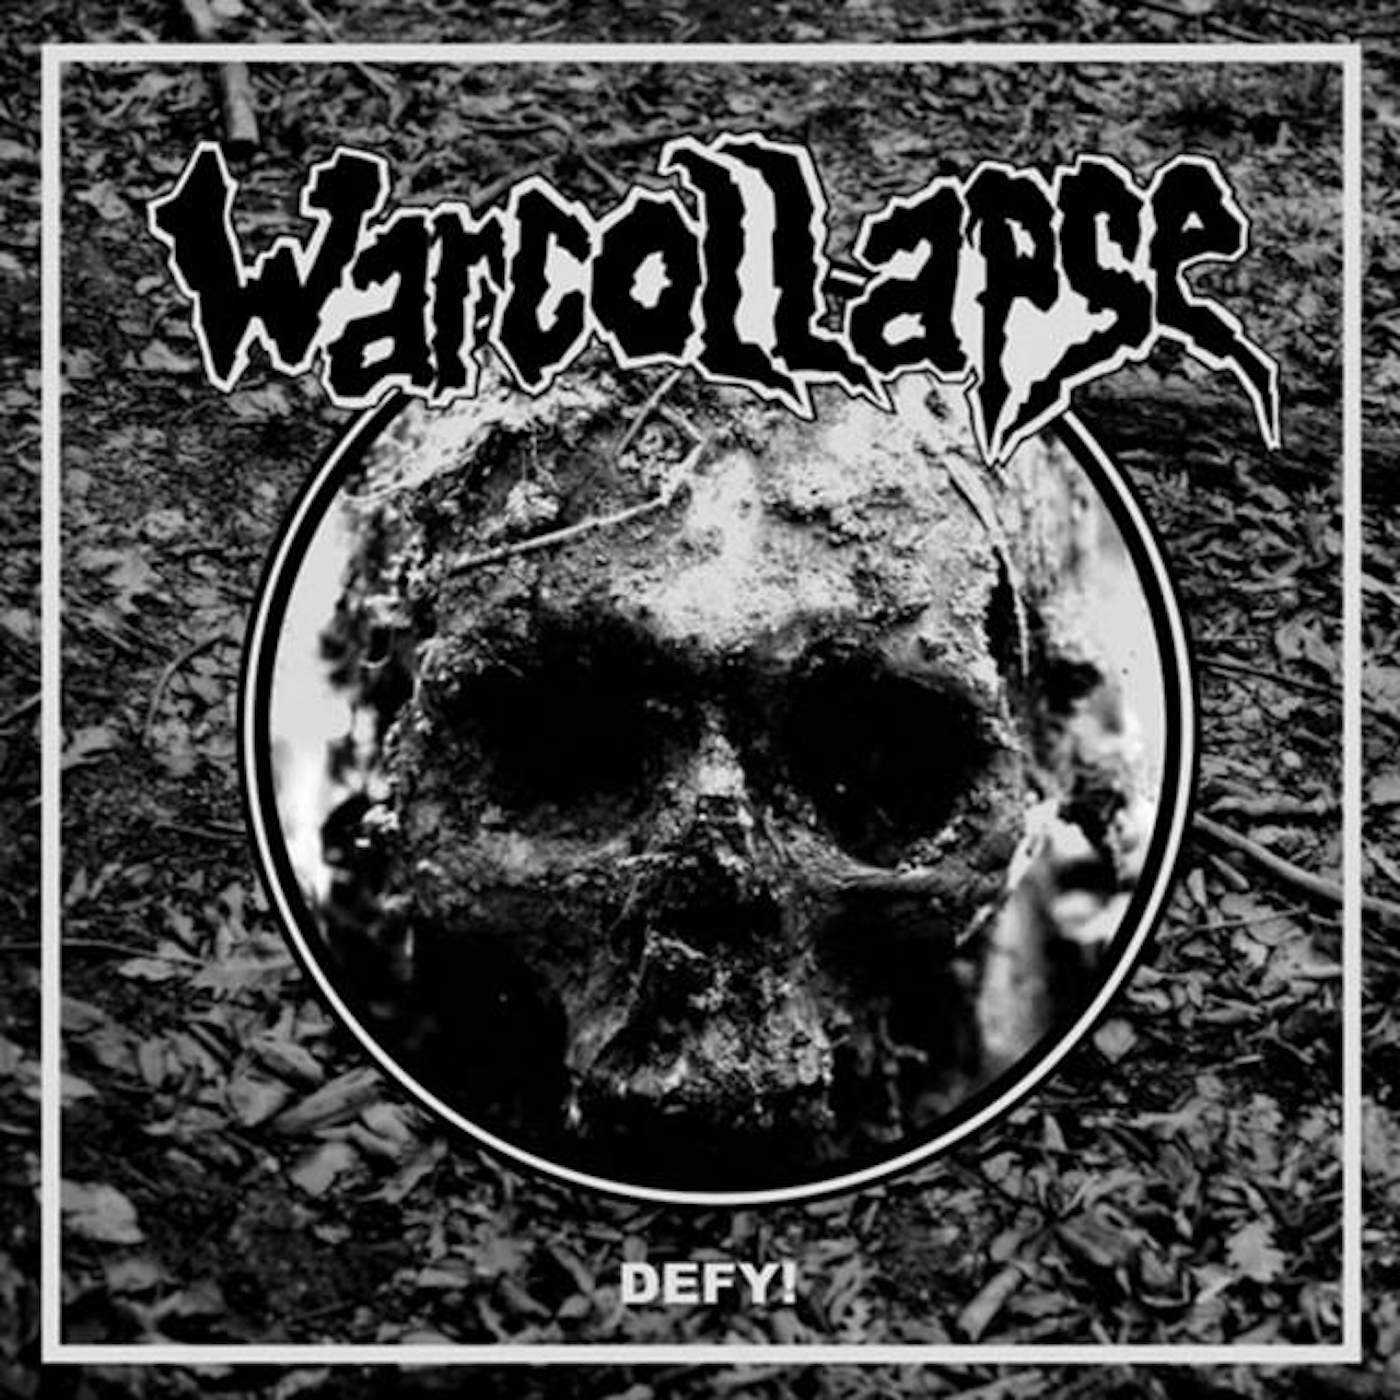 Warcollapse